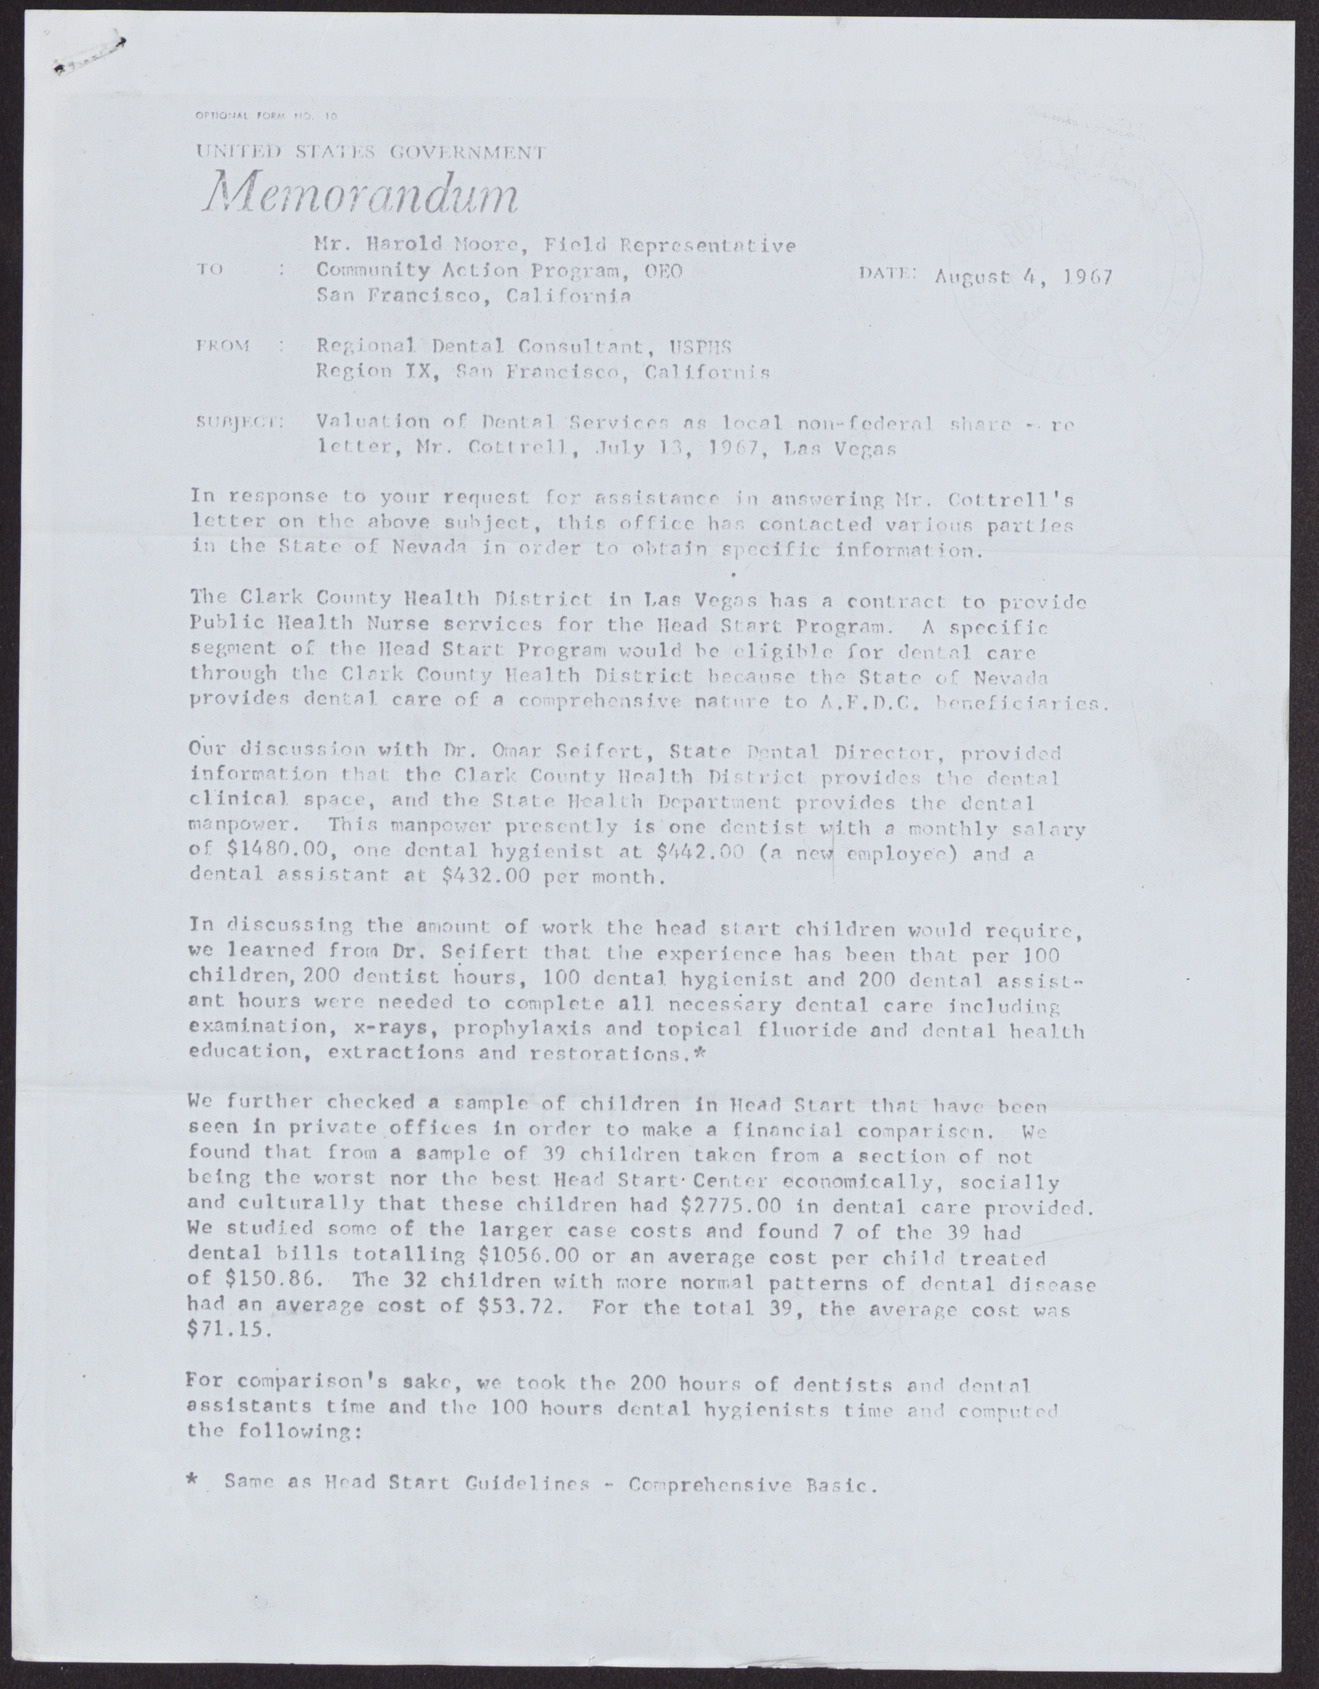 Letter to Mr. Harold Moore from Winston W. Frenzel (2 pages), August 4, 1967